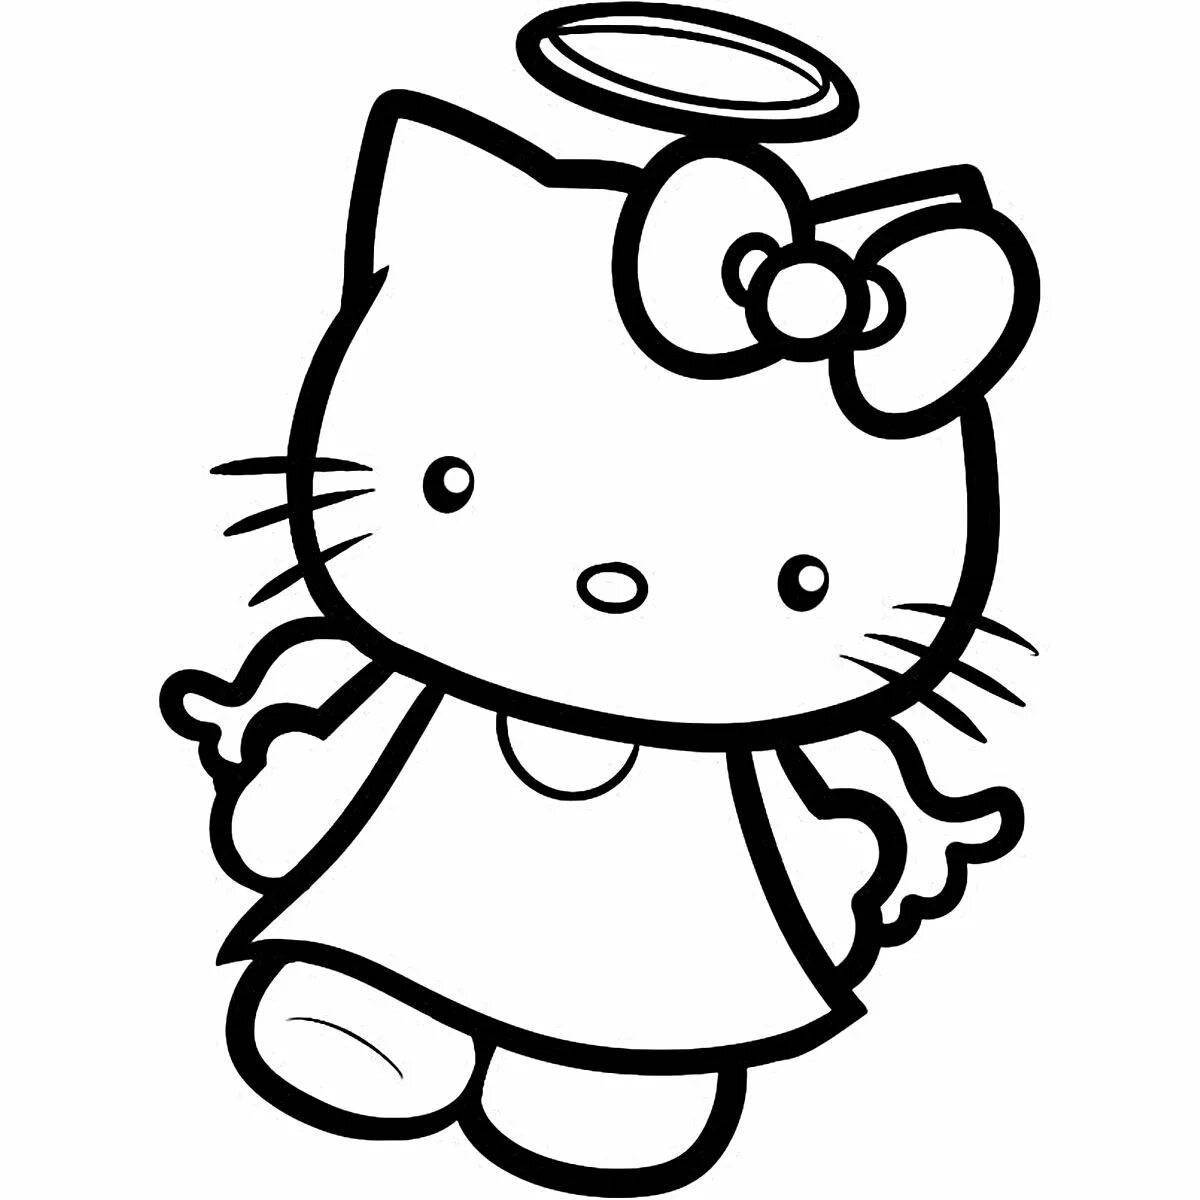 Coloring book playful angel cat